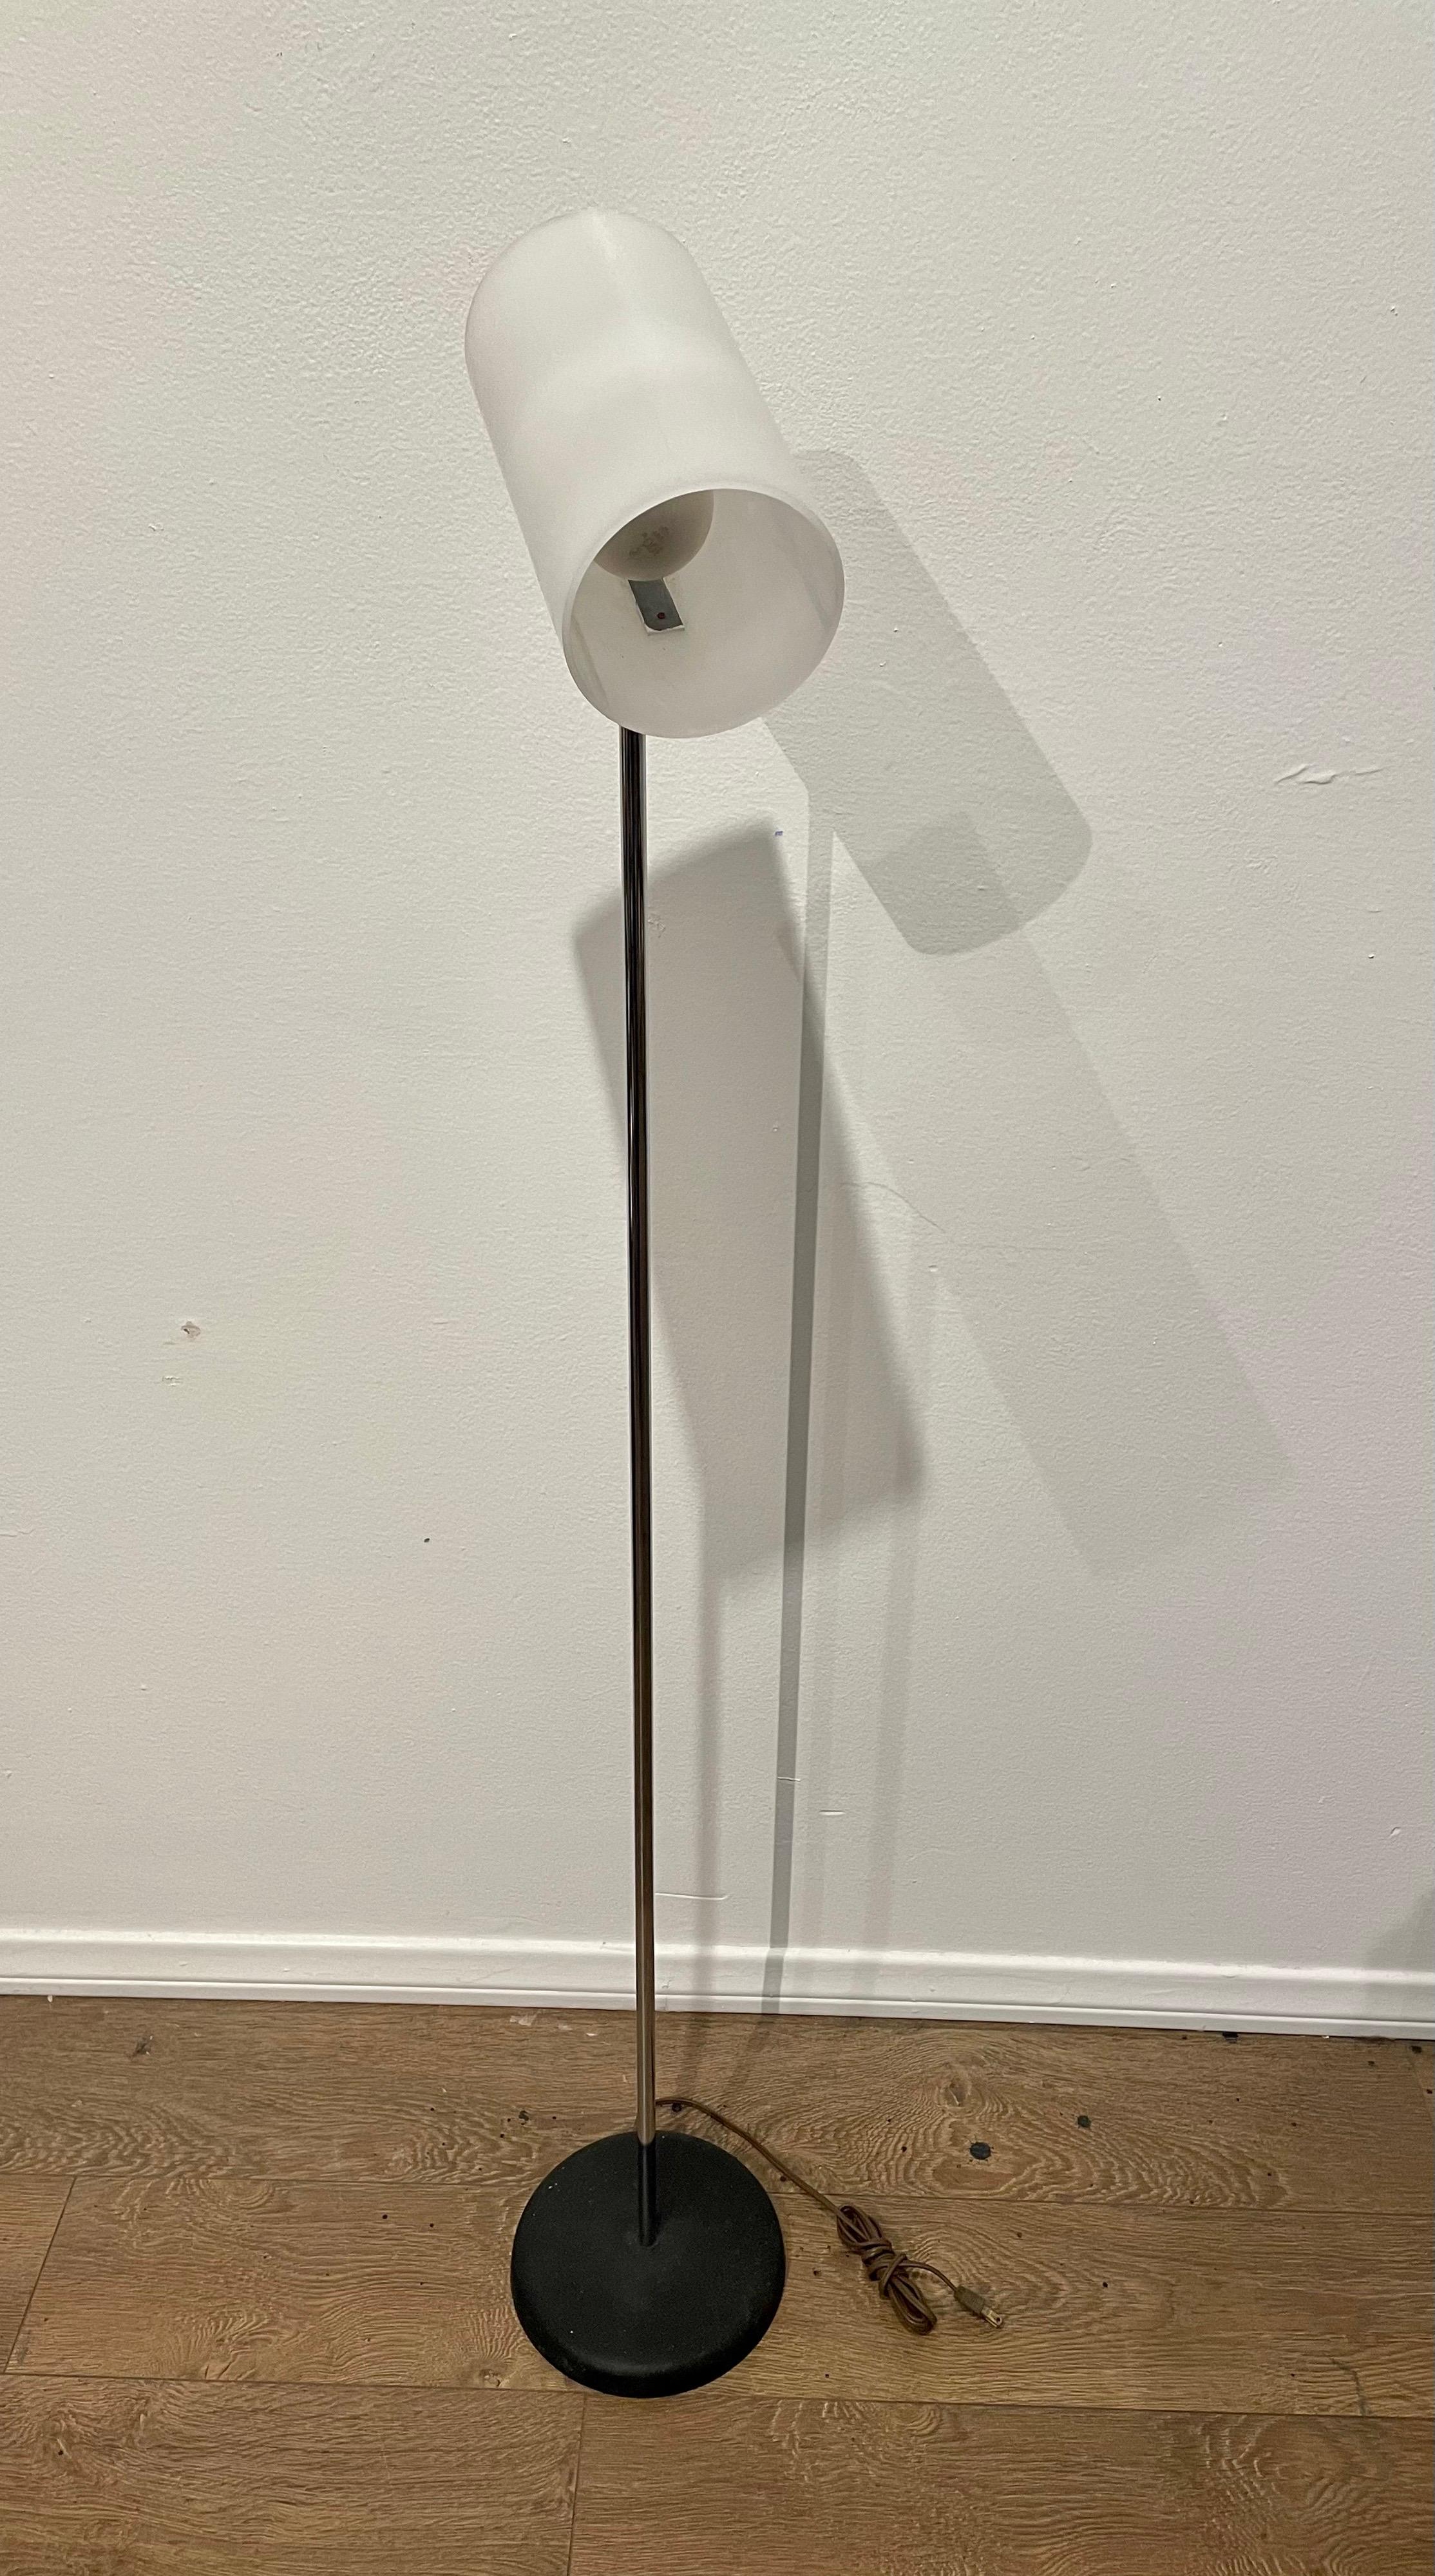 North American 1970's Spot Floor Lamp by Lightolier with Movable Head